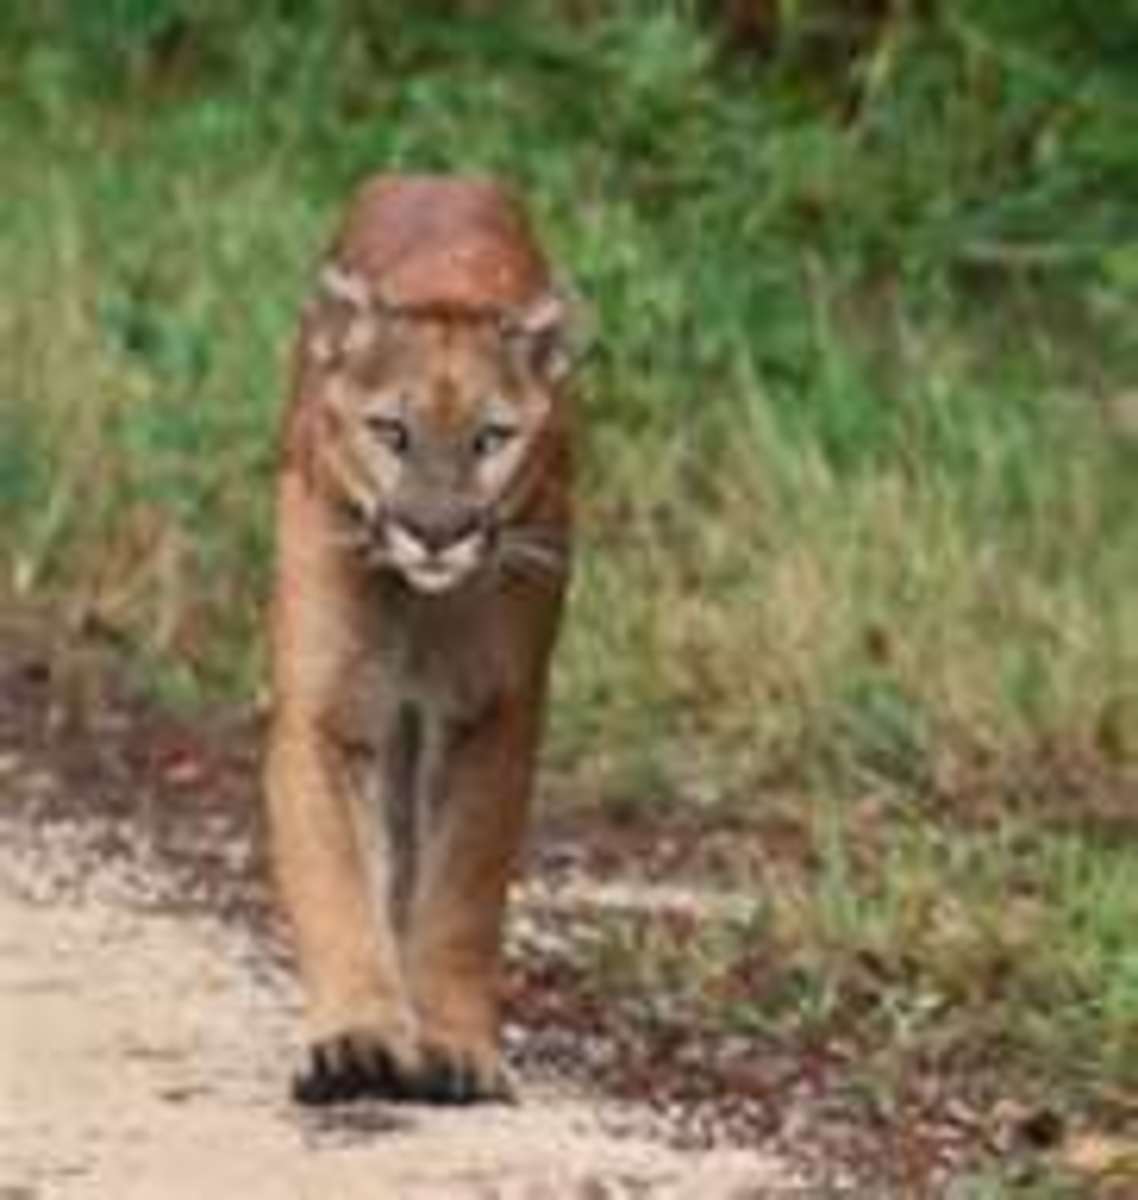 Wildlife In The State Of Florida: Photos Of Some Of The Most Common Wild Animals Seen In Florida